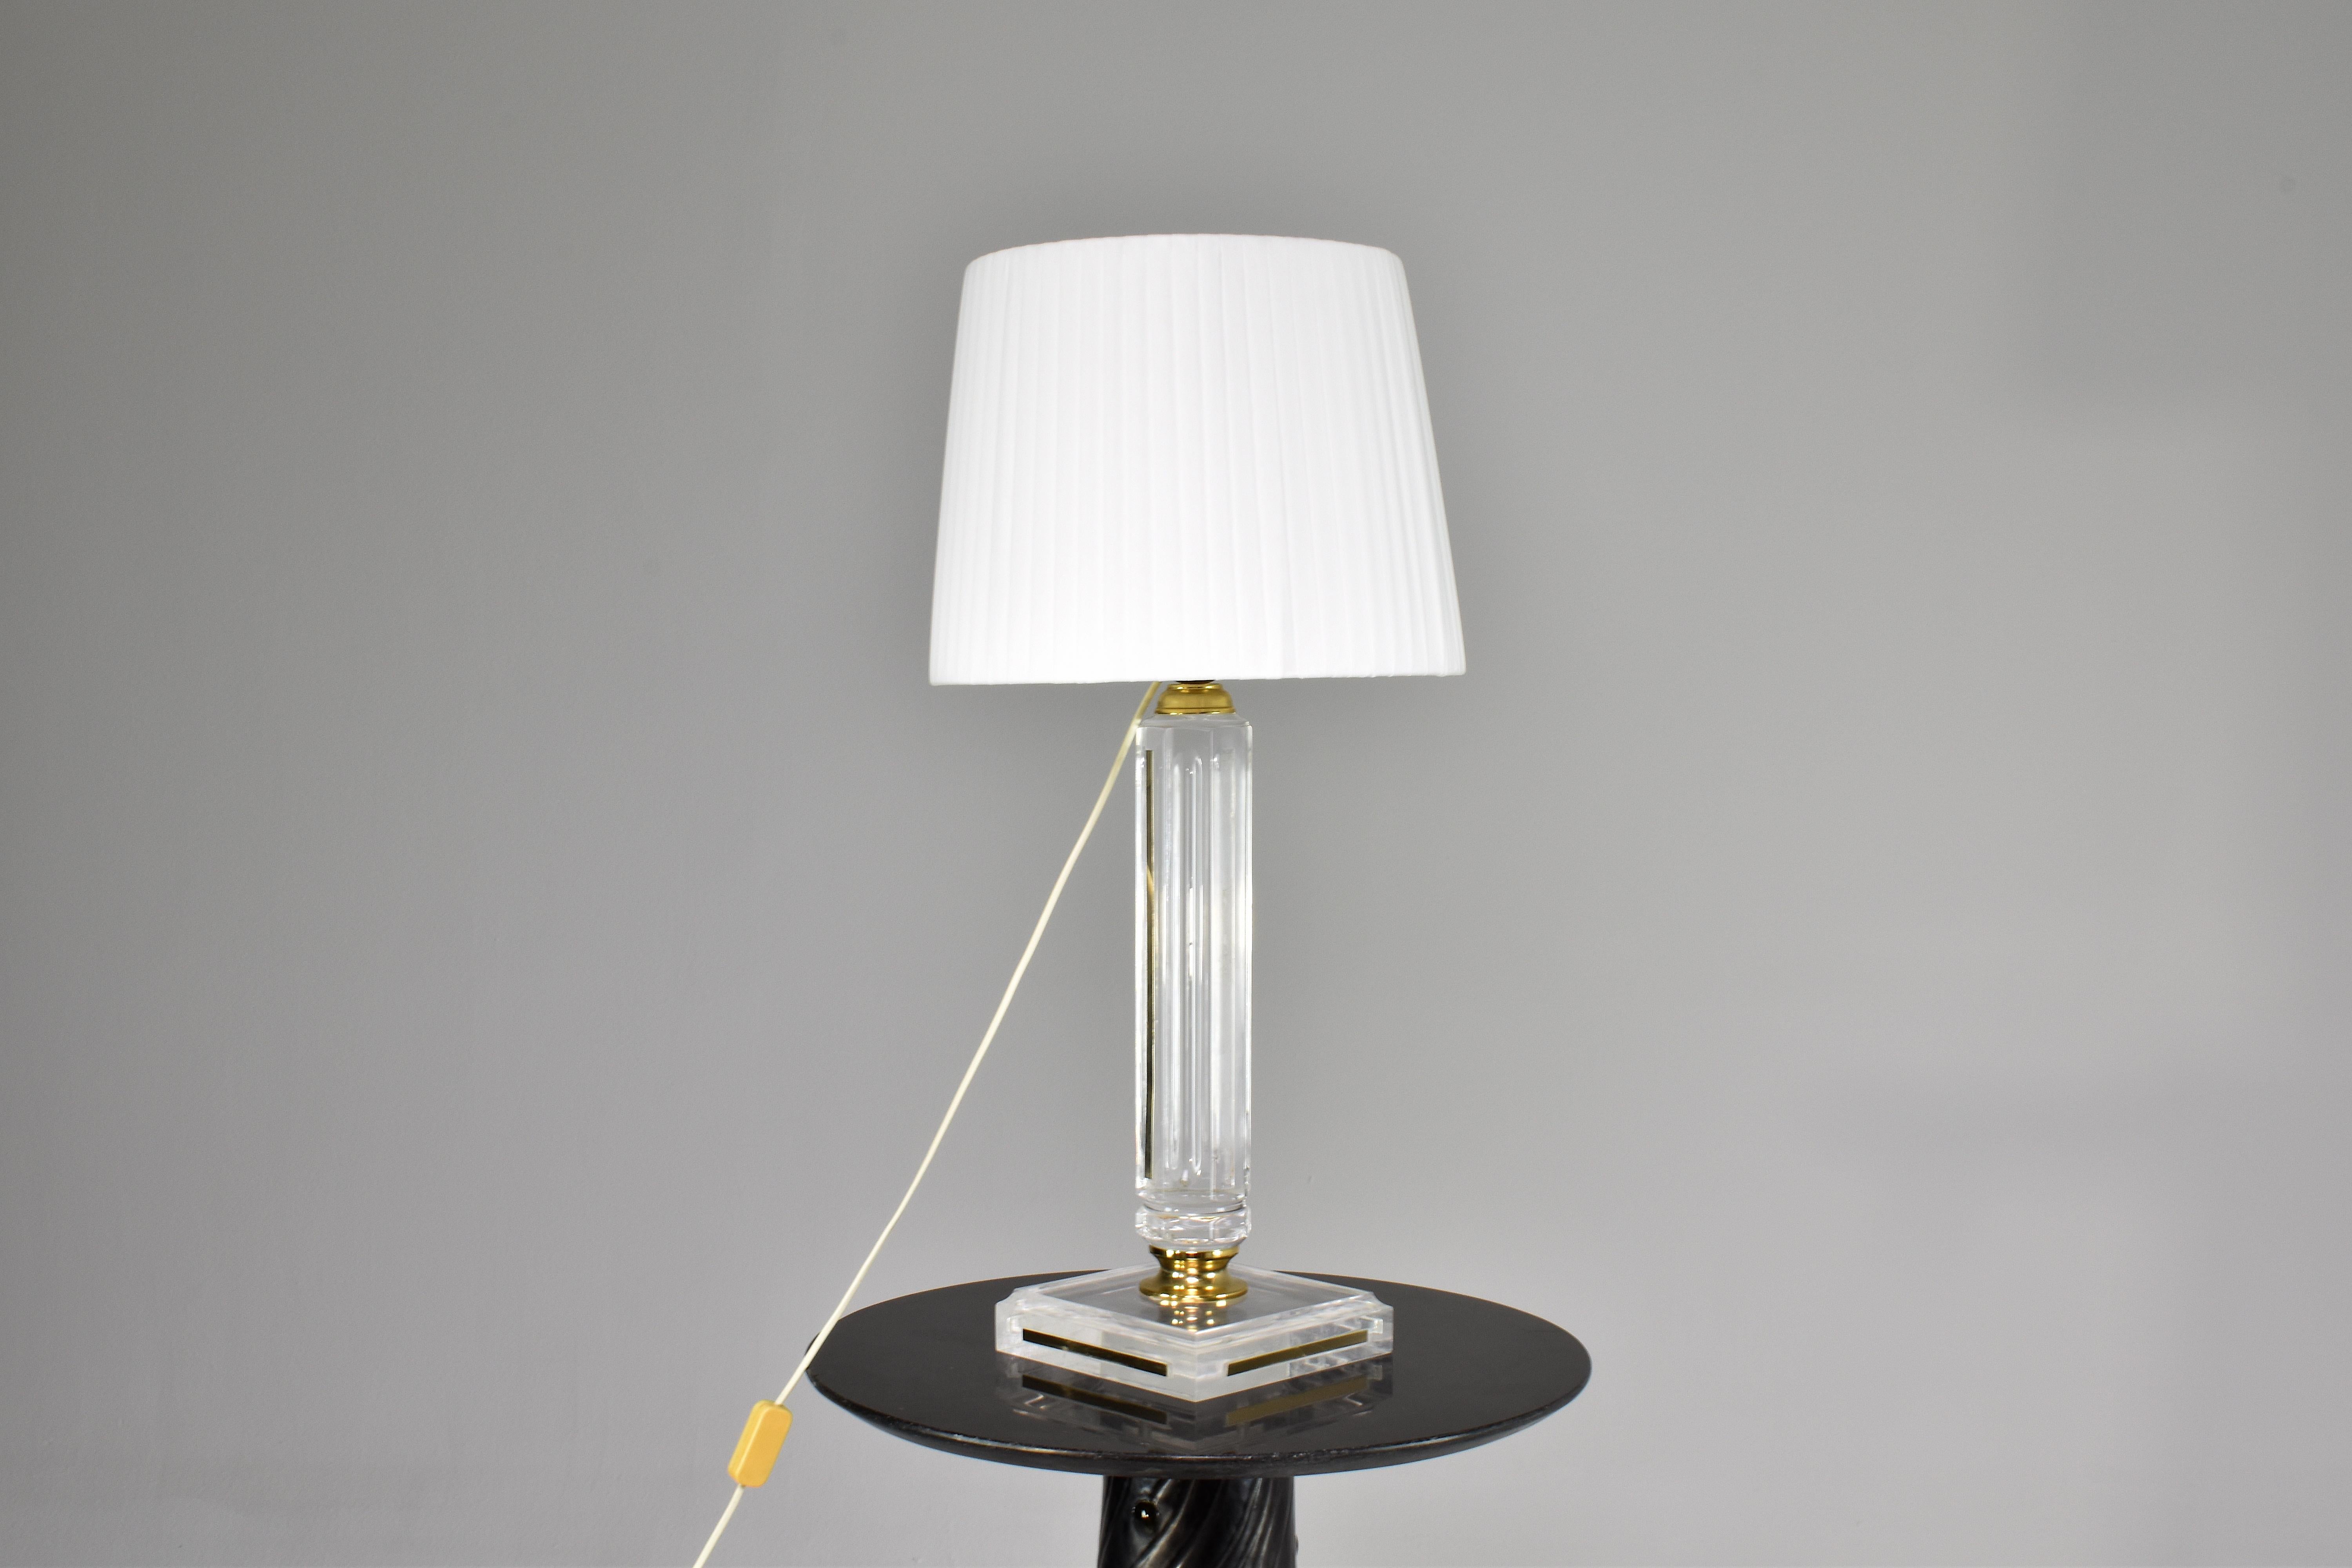 A superb tall French plexiglass table lamp in Hollywood Regency style with brass details. The transparency creates a beautiful interplay of light and form. Whether showcased atop a console table, or in a prominent spot in your living area, this